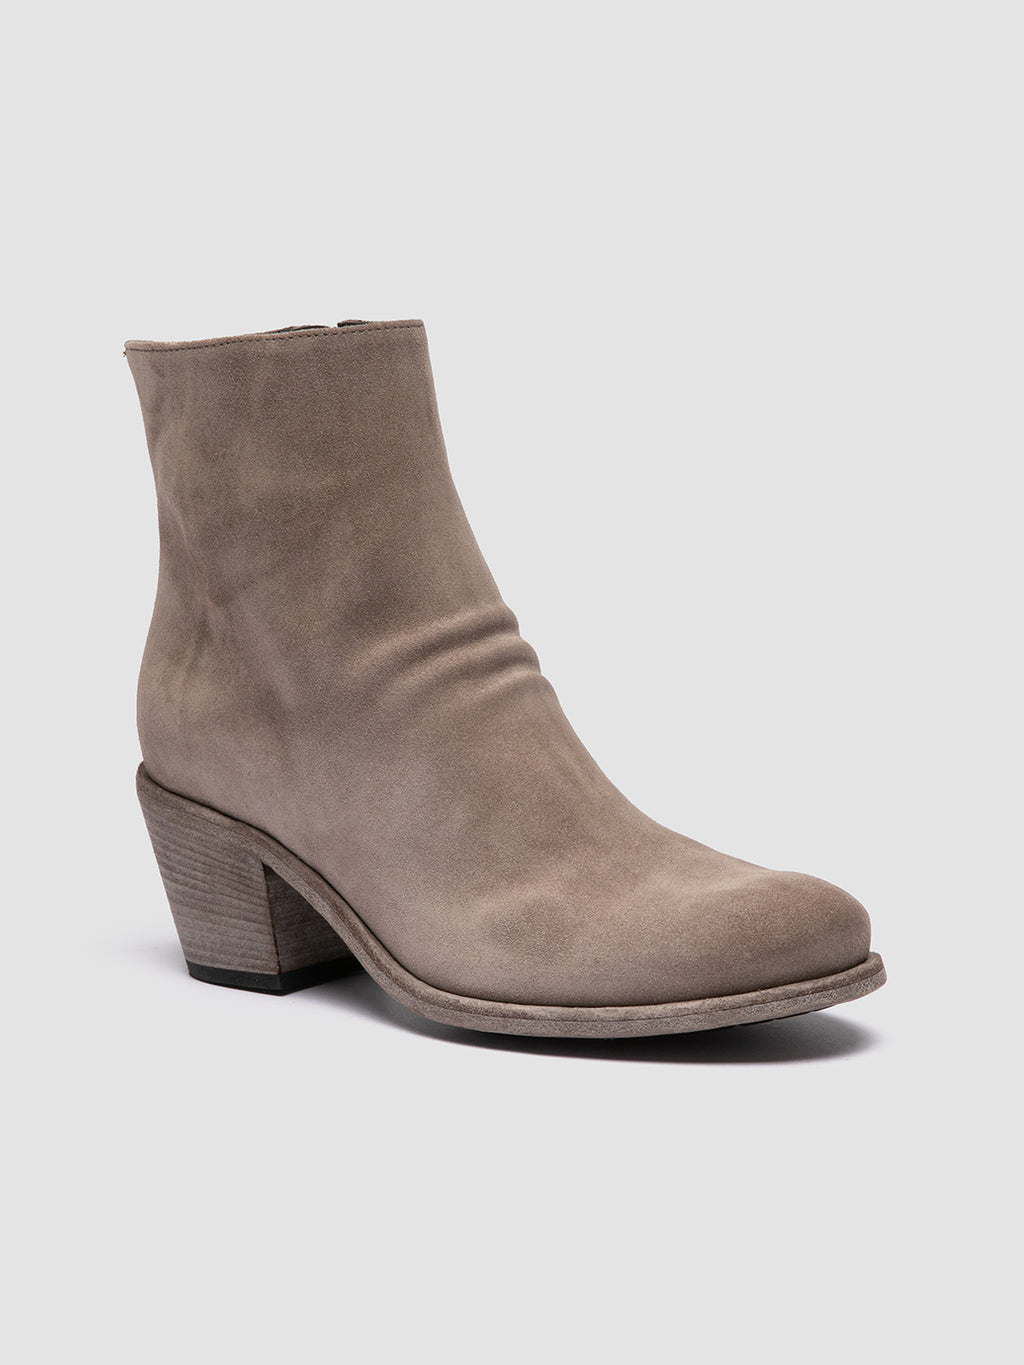 GODEAU 001 - Taupe Suede Zipped Boots